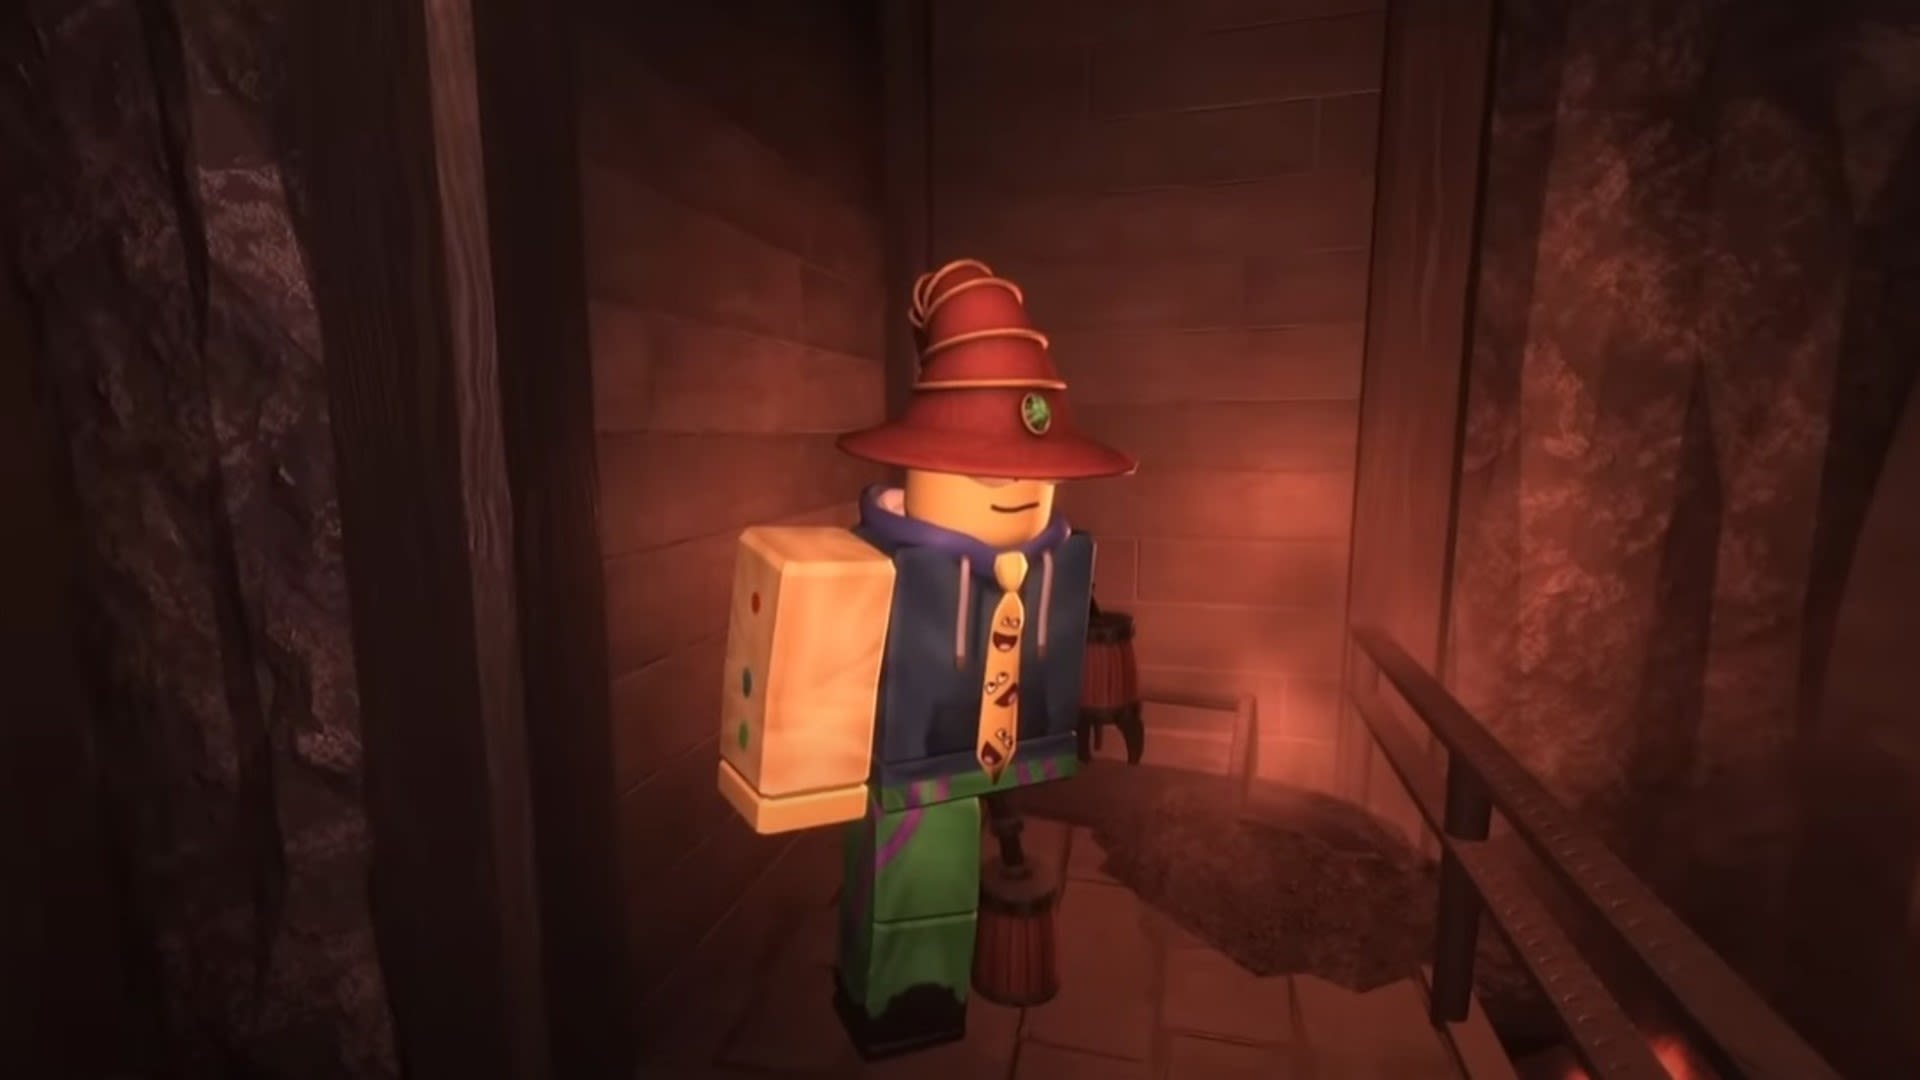 Roblox Doors Floor 2 checks us out of the hotel and sends us into the caverns of the mines